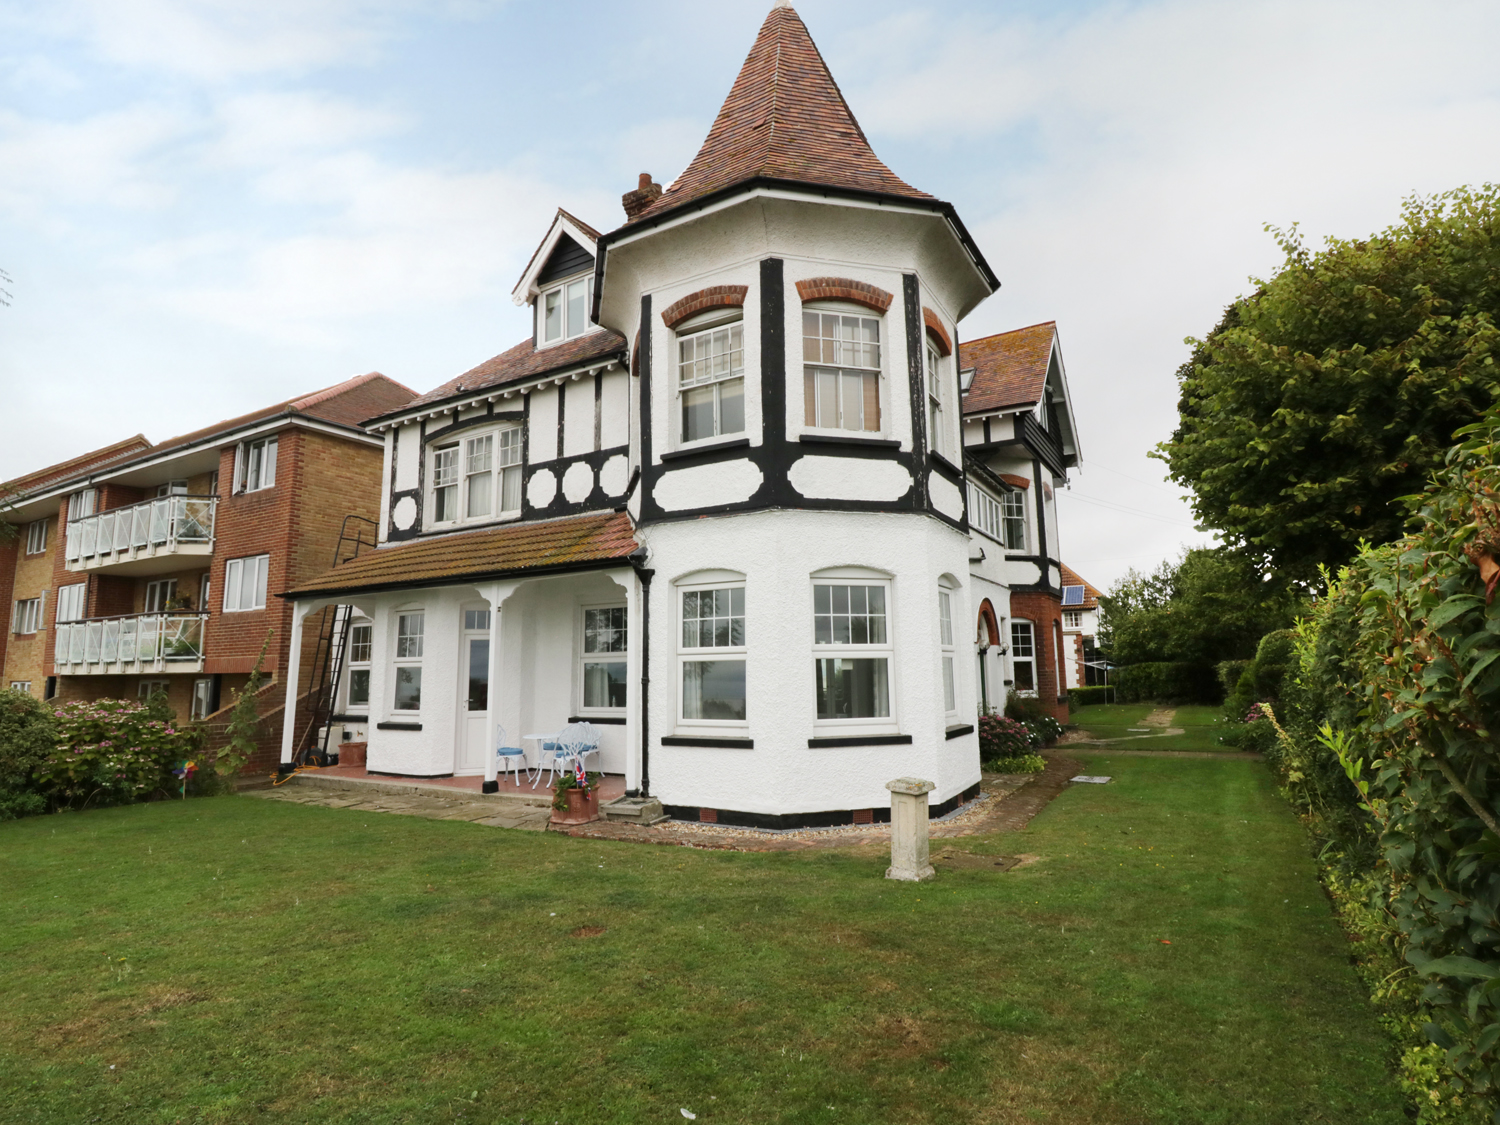 2 bedroom Cottage for rent in Frinton on Sea